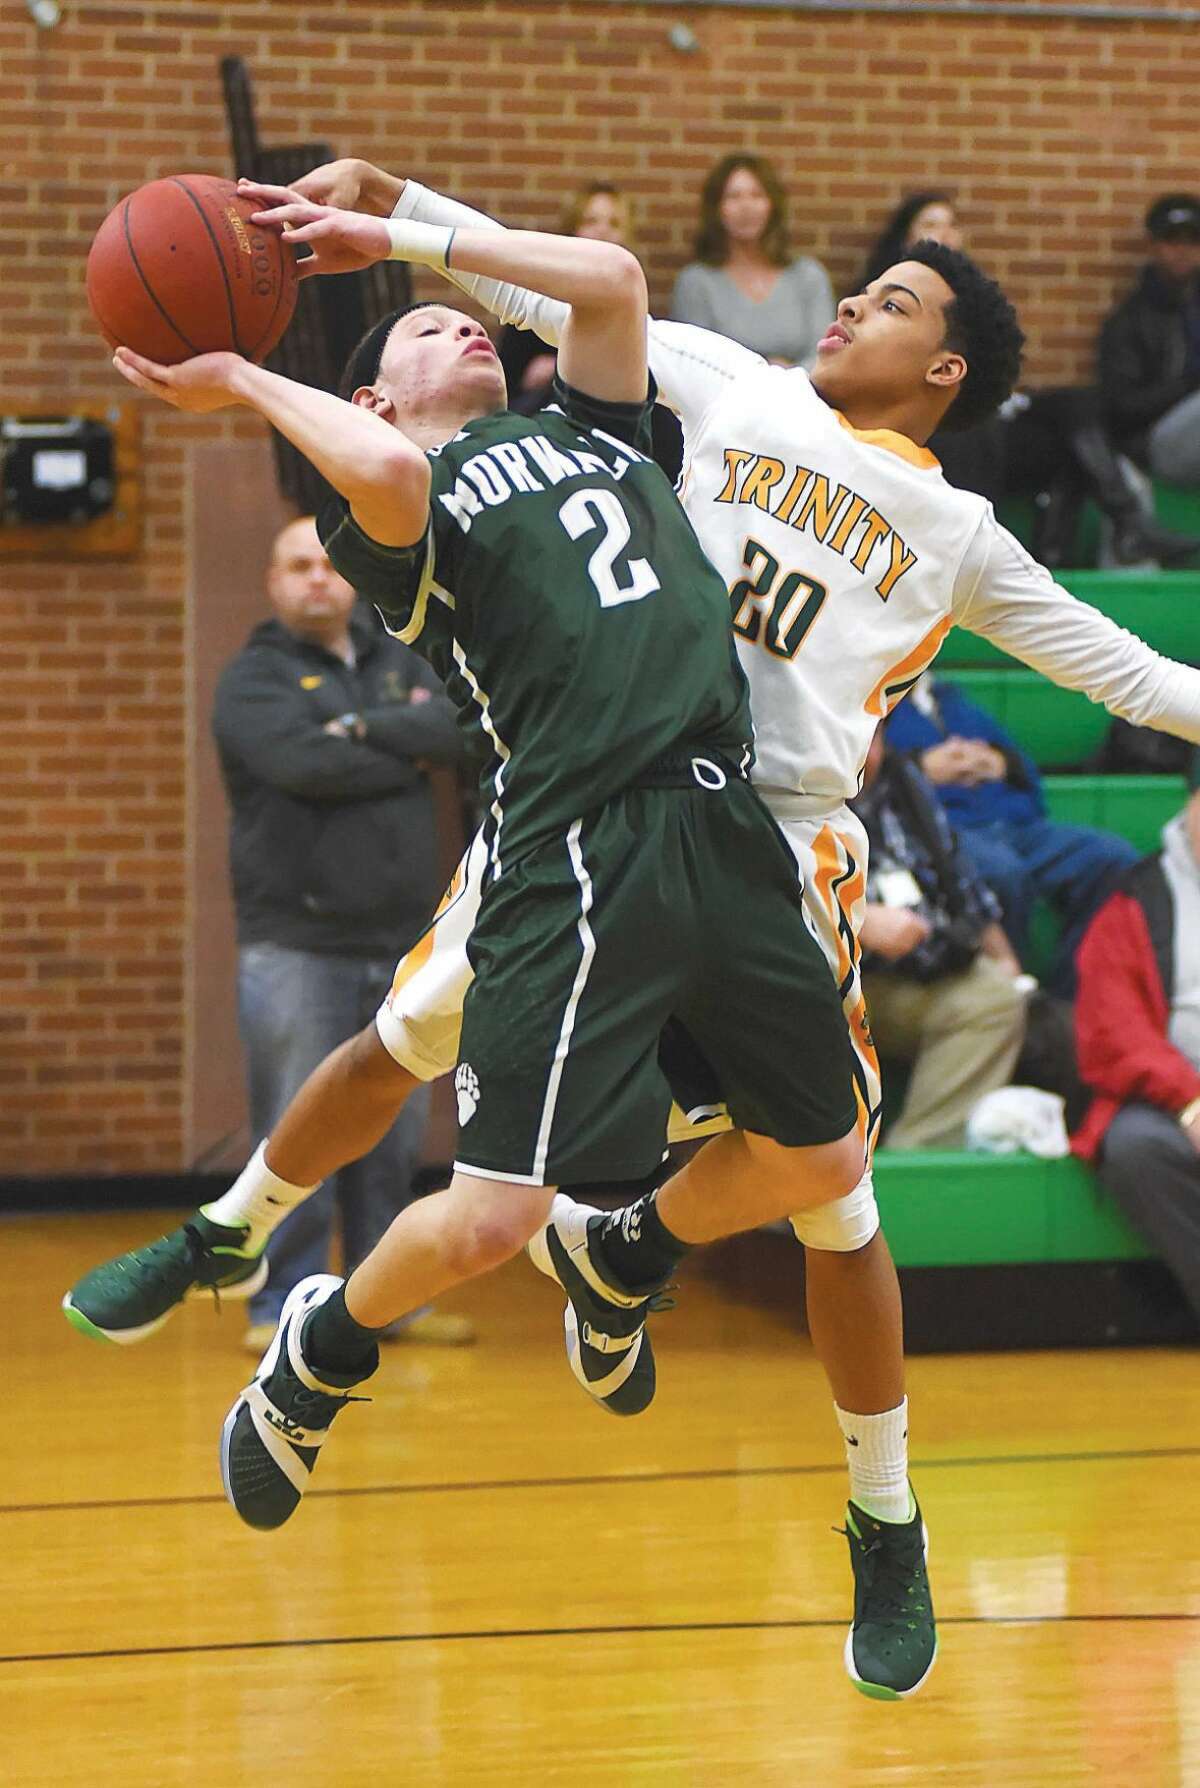 Hour photo/John Nash - Norwalk's Mark Crafter Jr. (2) gets fouled by Trinity Catholic's Cameron Blake during the first half of Tuesday's FCIAC boys basketball game at Walsh Court in Stamford.